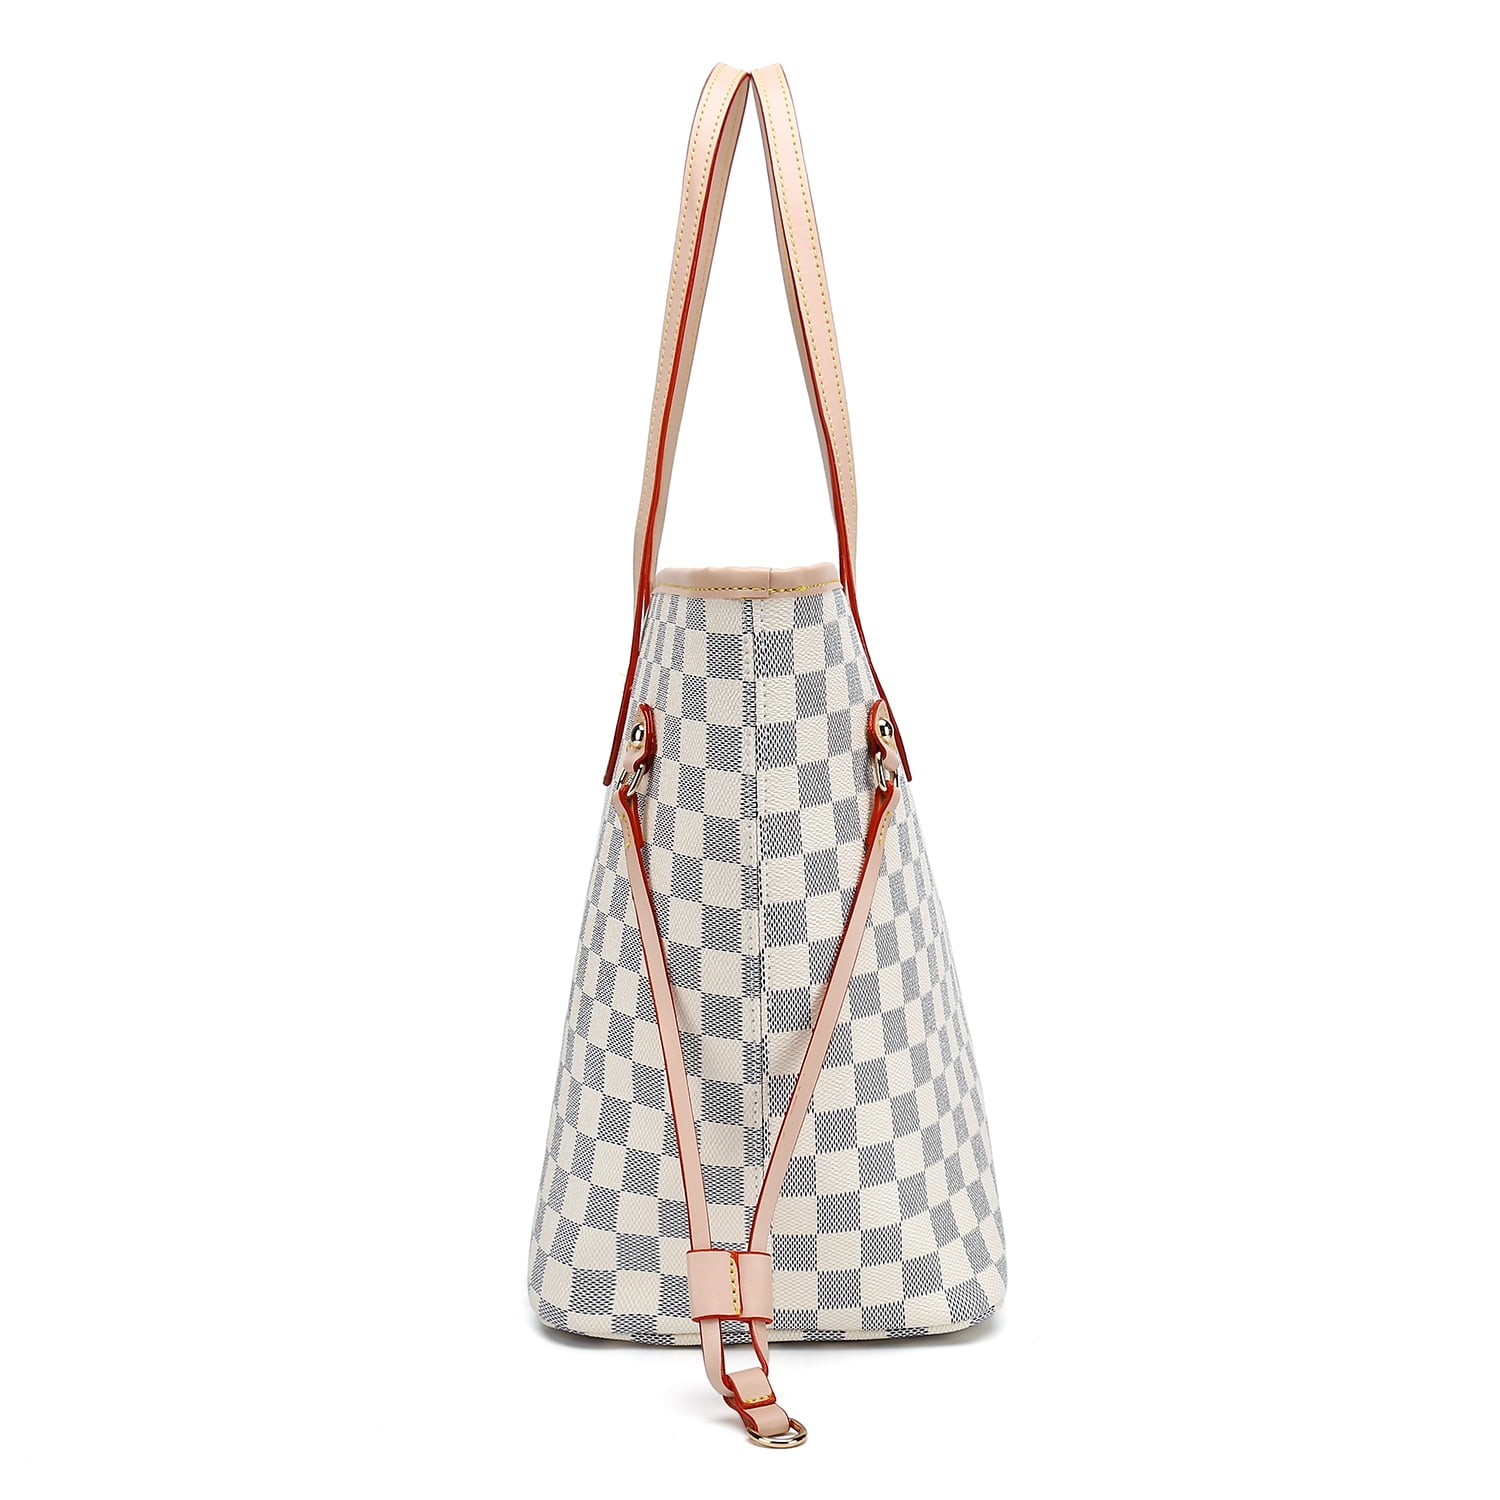 TWENTY FOUR Checkered Tote Shoulder Bag with inner pouch Big